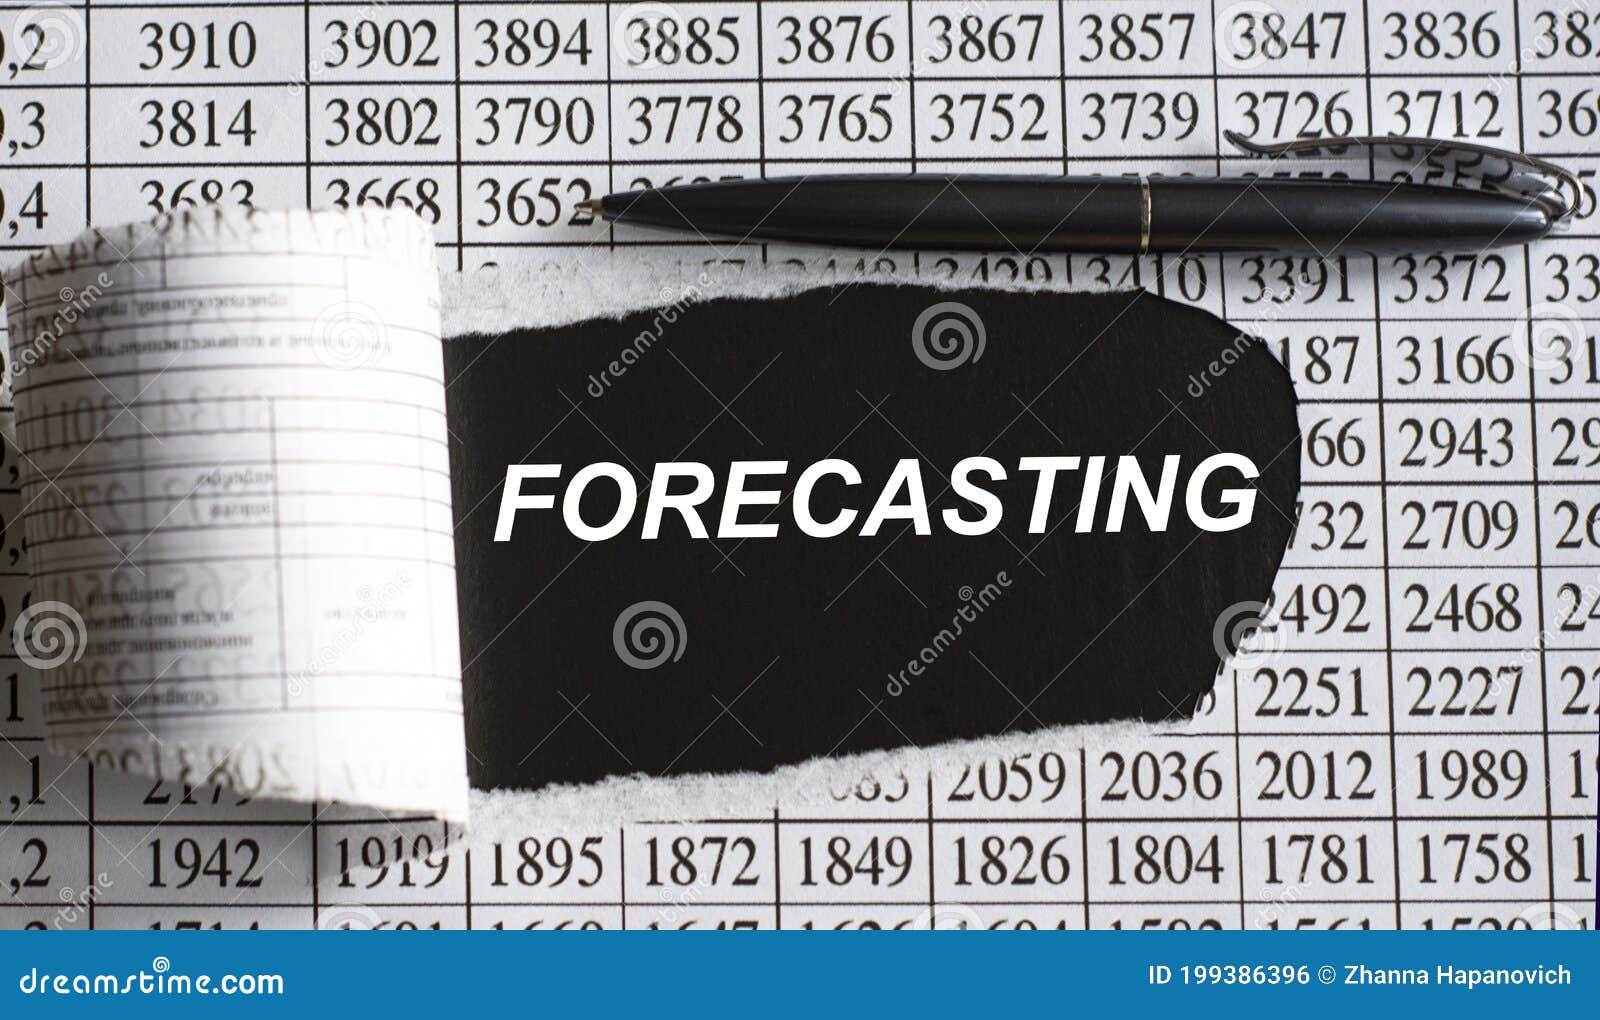 forecasting is the word behind torn office paper with numbers and a black pen